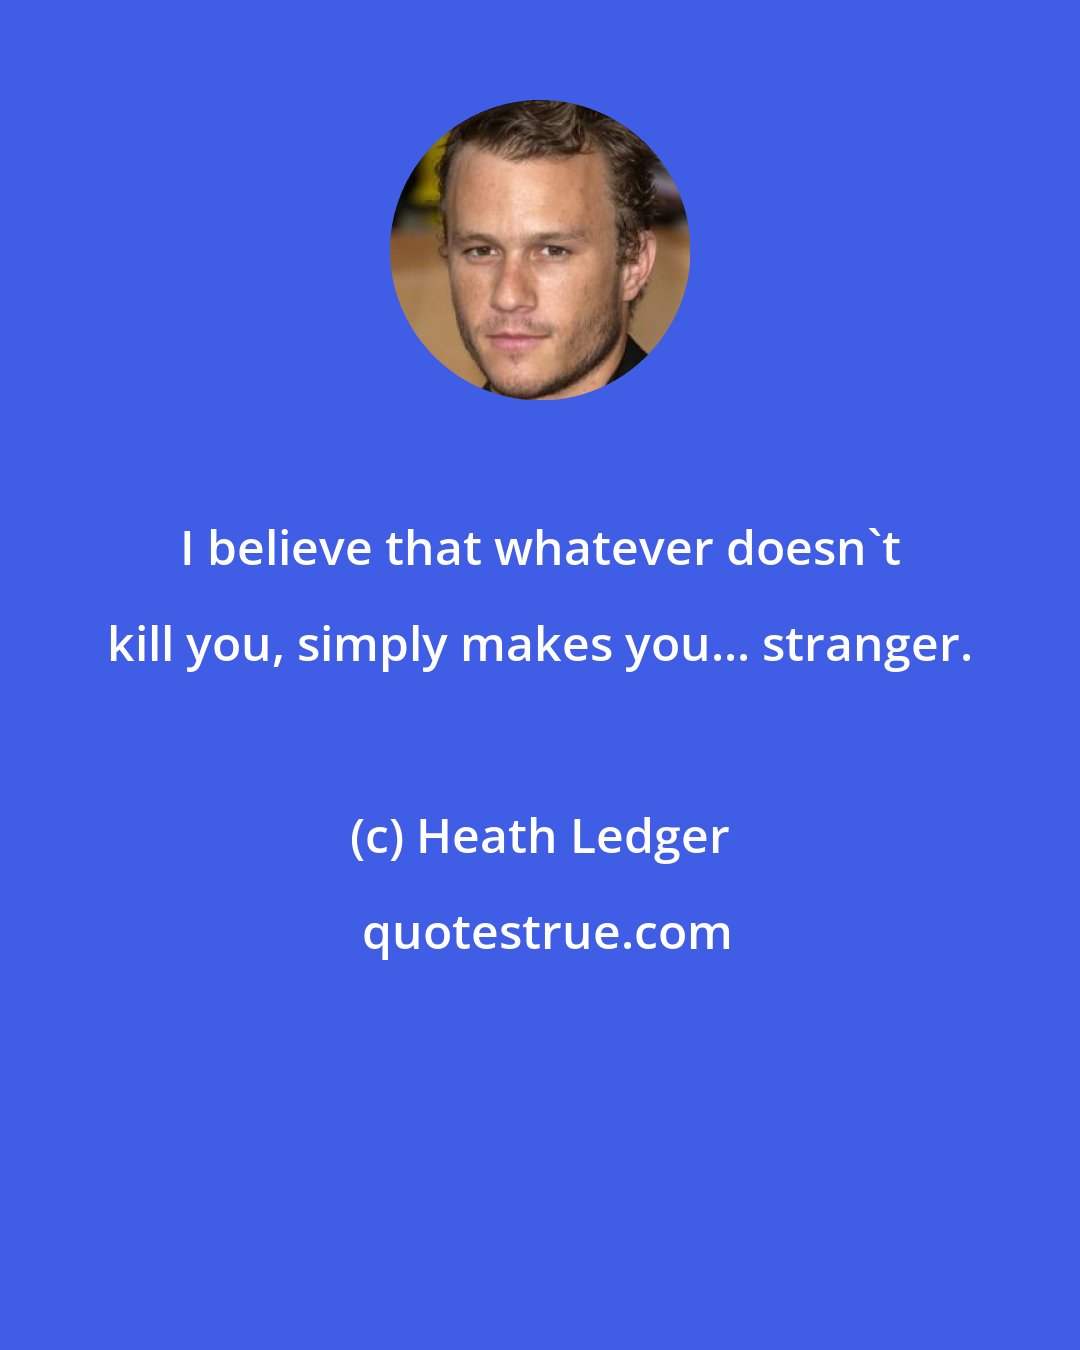 Heath Ledger: I believe that whatever doesn't kill you, simply makes you... stranger.